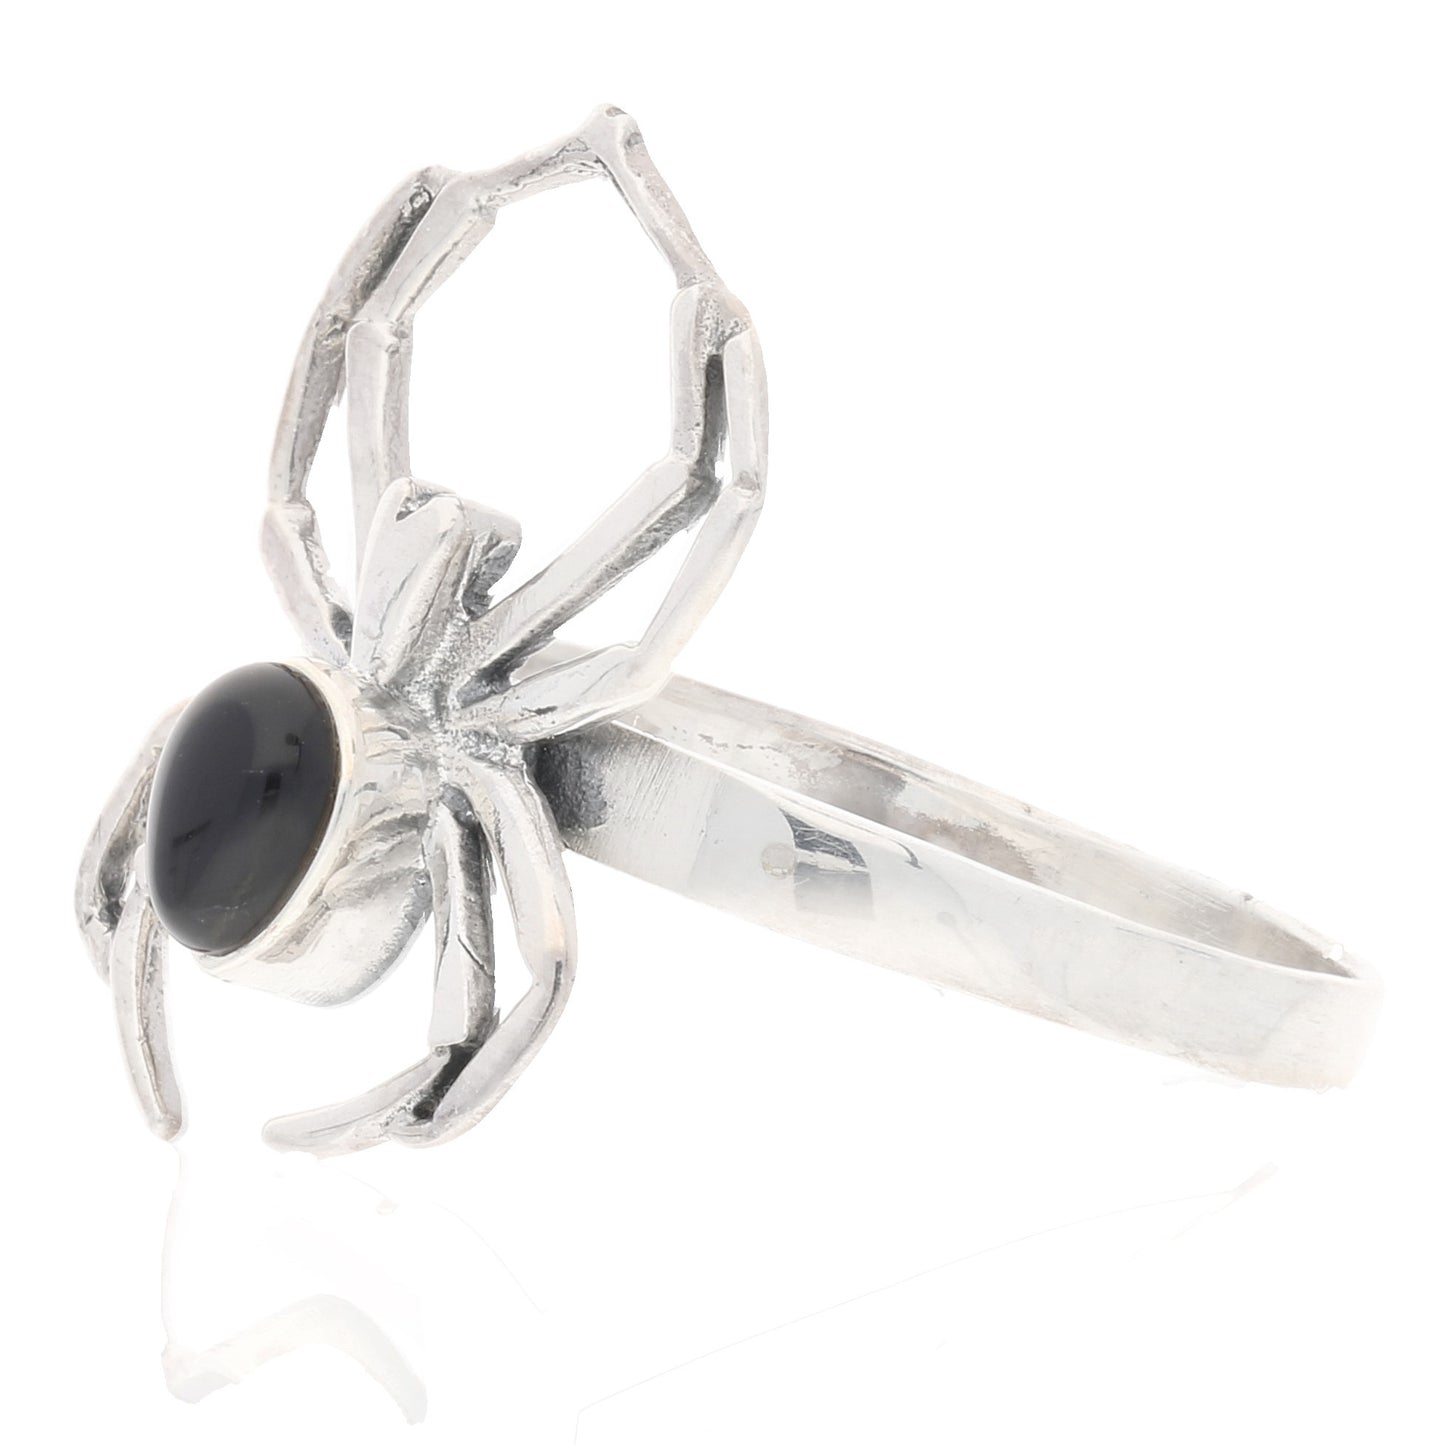 Black Widow Spider Sterling Silver Ring - Silver Insanity